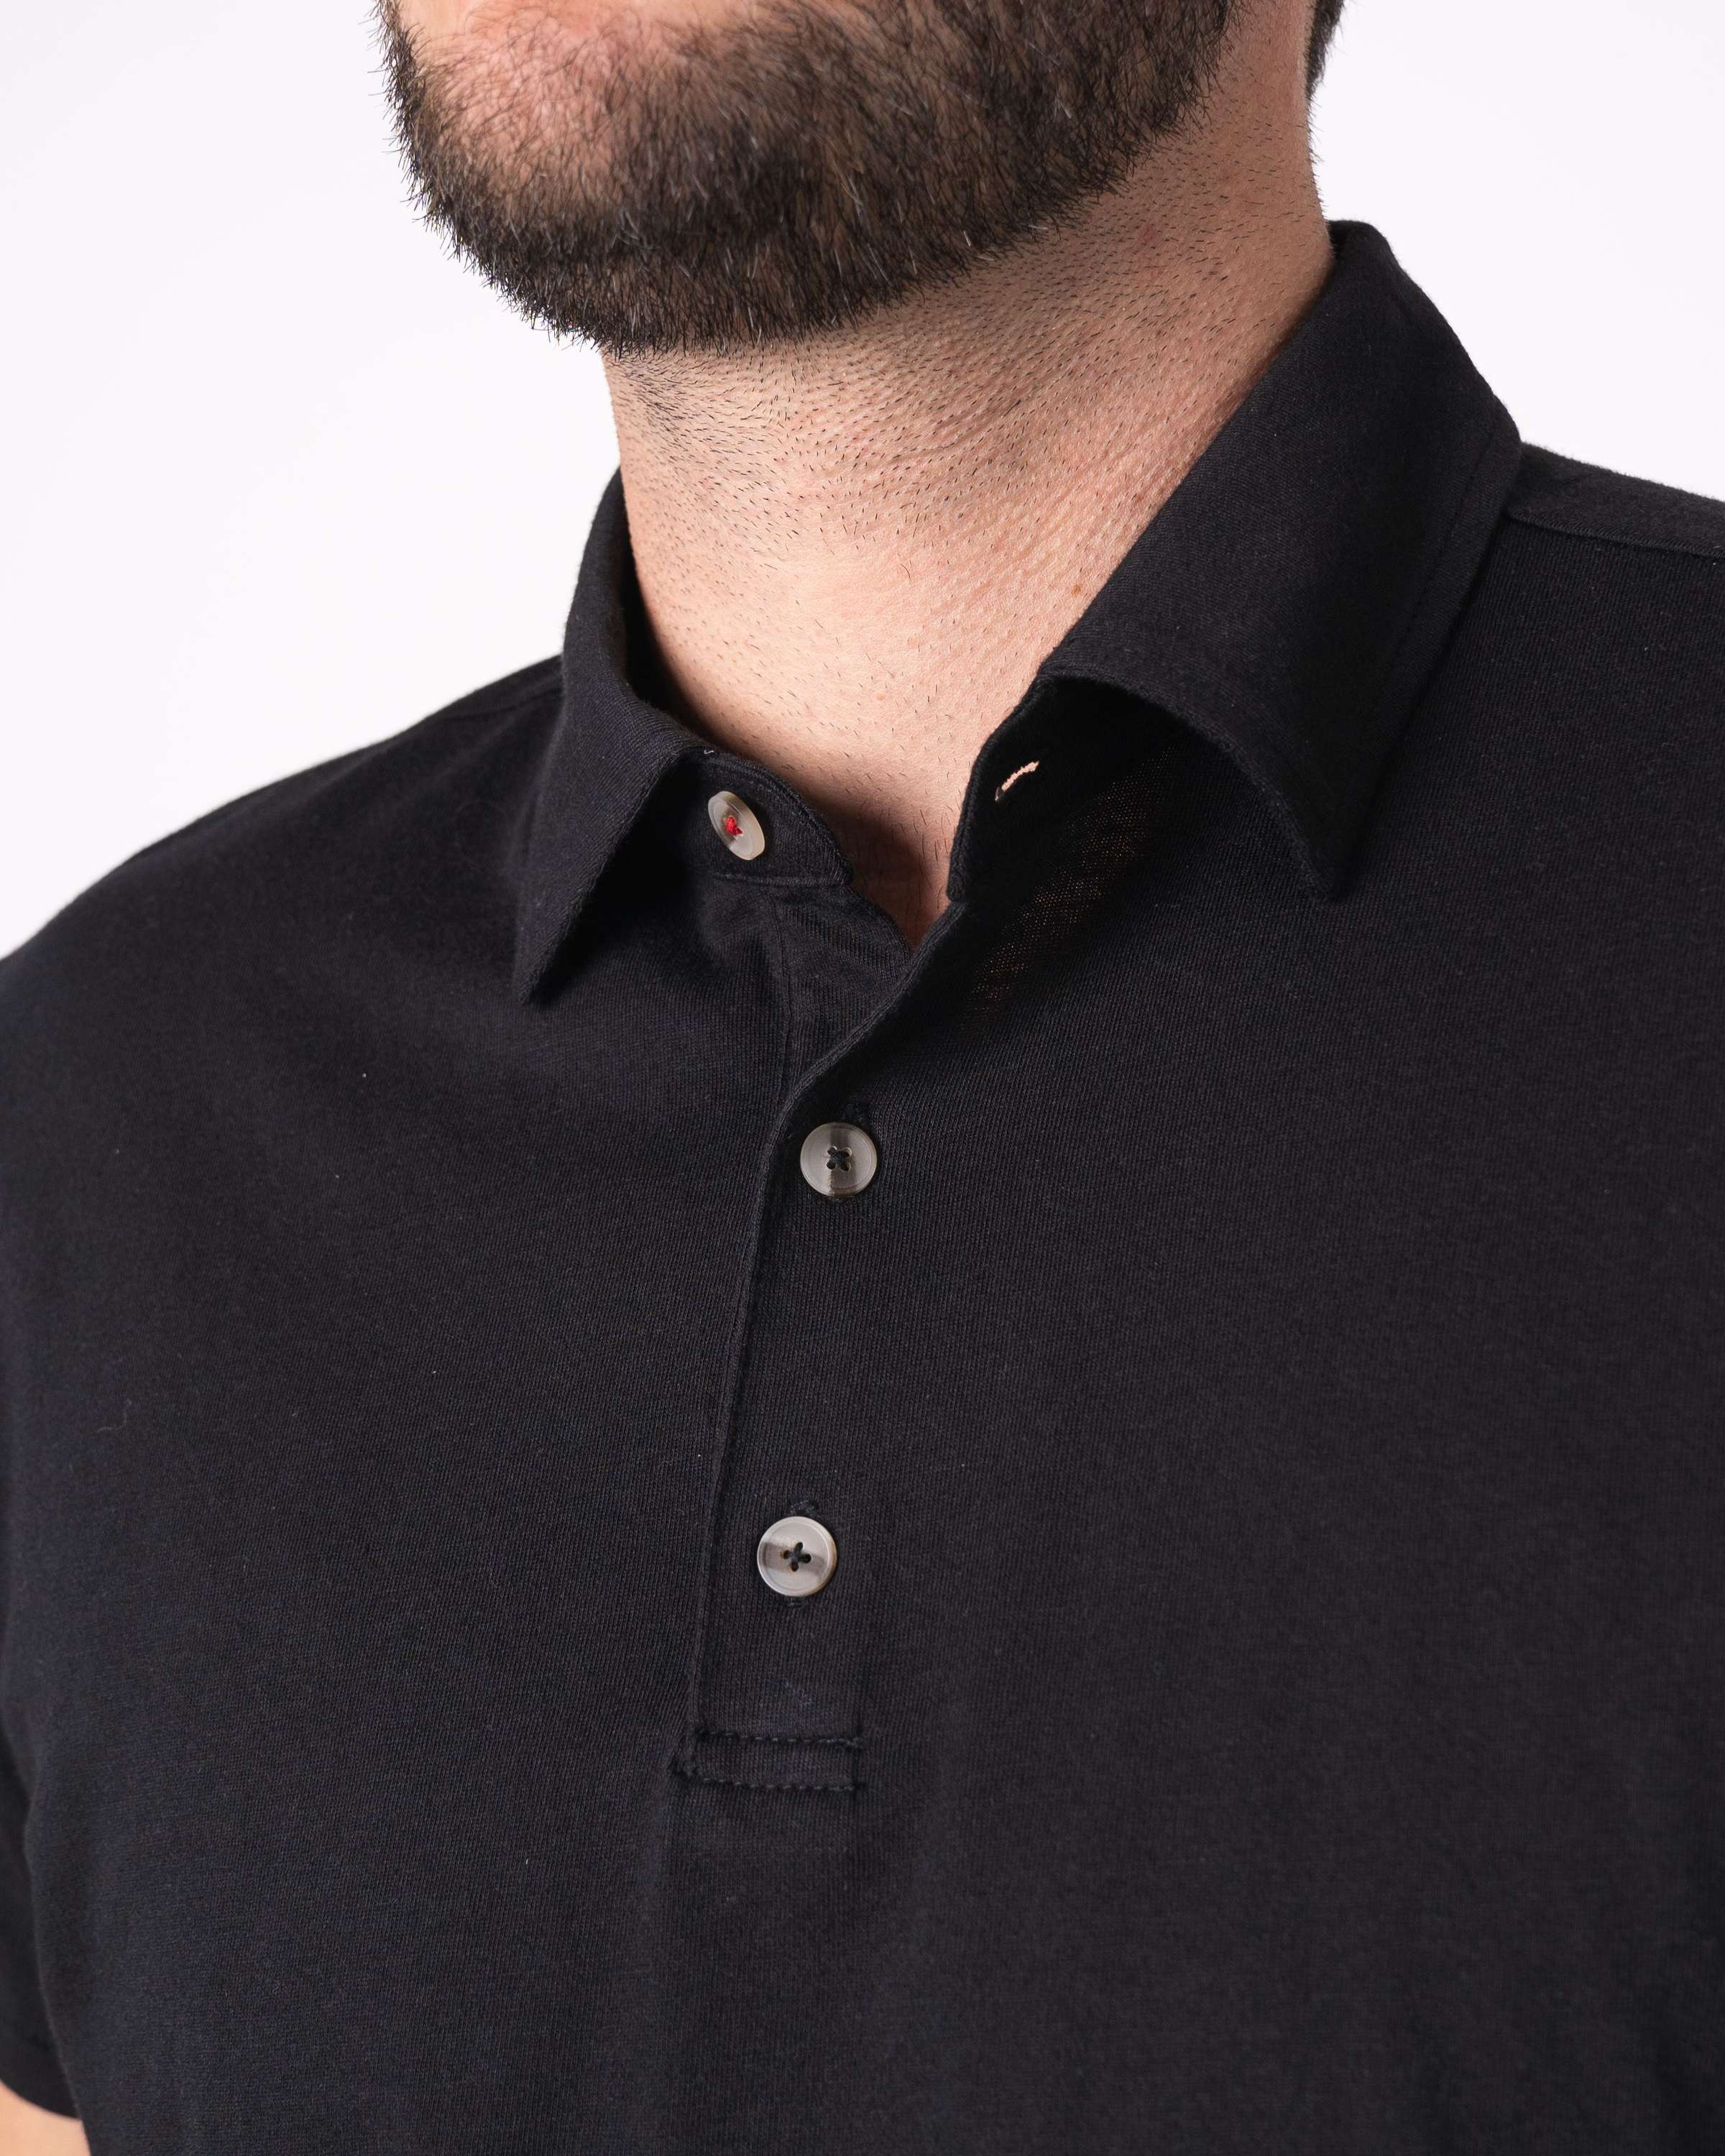 The Clothes That Made The Man: How a Polo Shirt Crossed Generations | Fresh Clean Tees